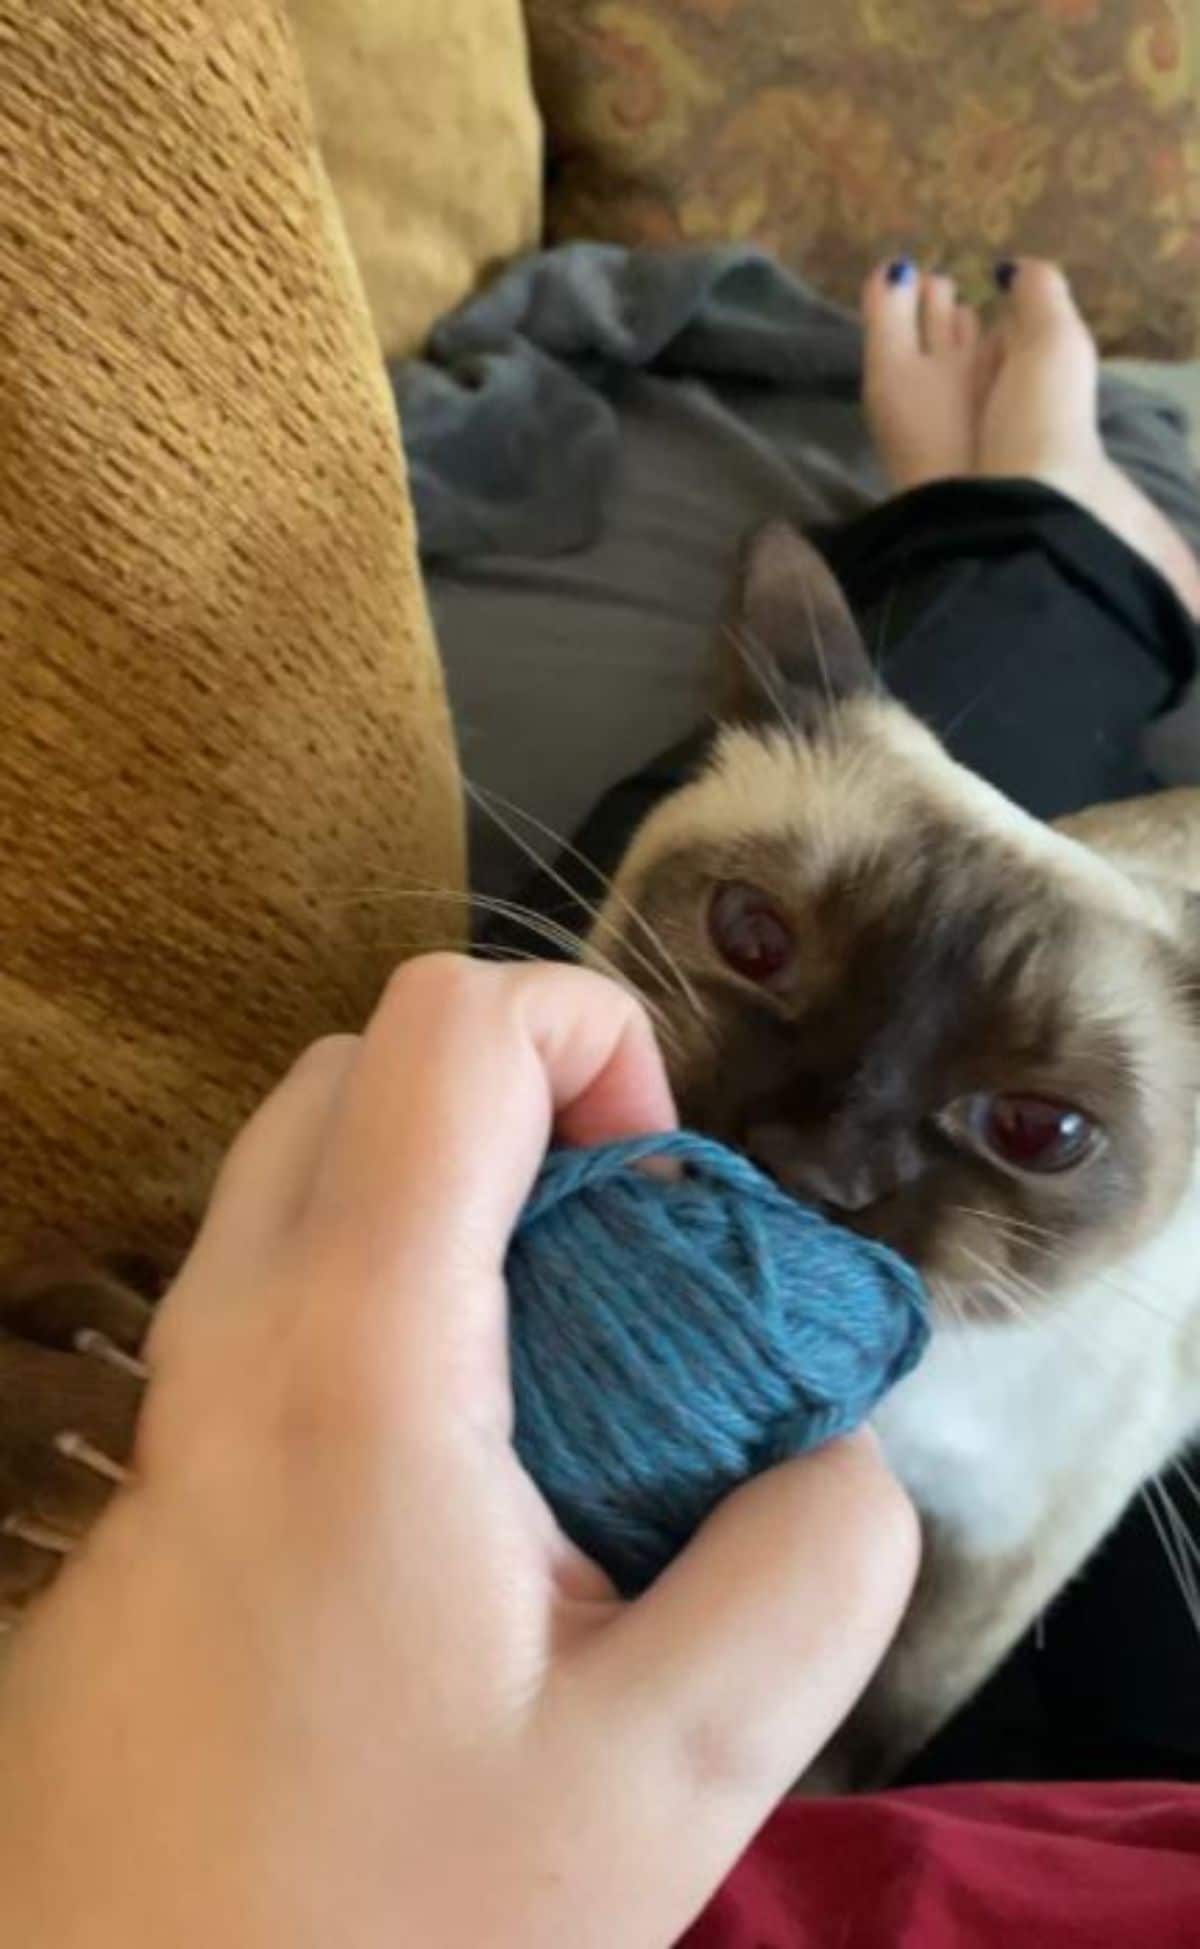 siamese cat trying to grab blue yarn from someone's hands